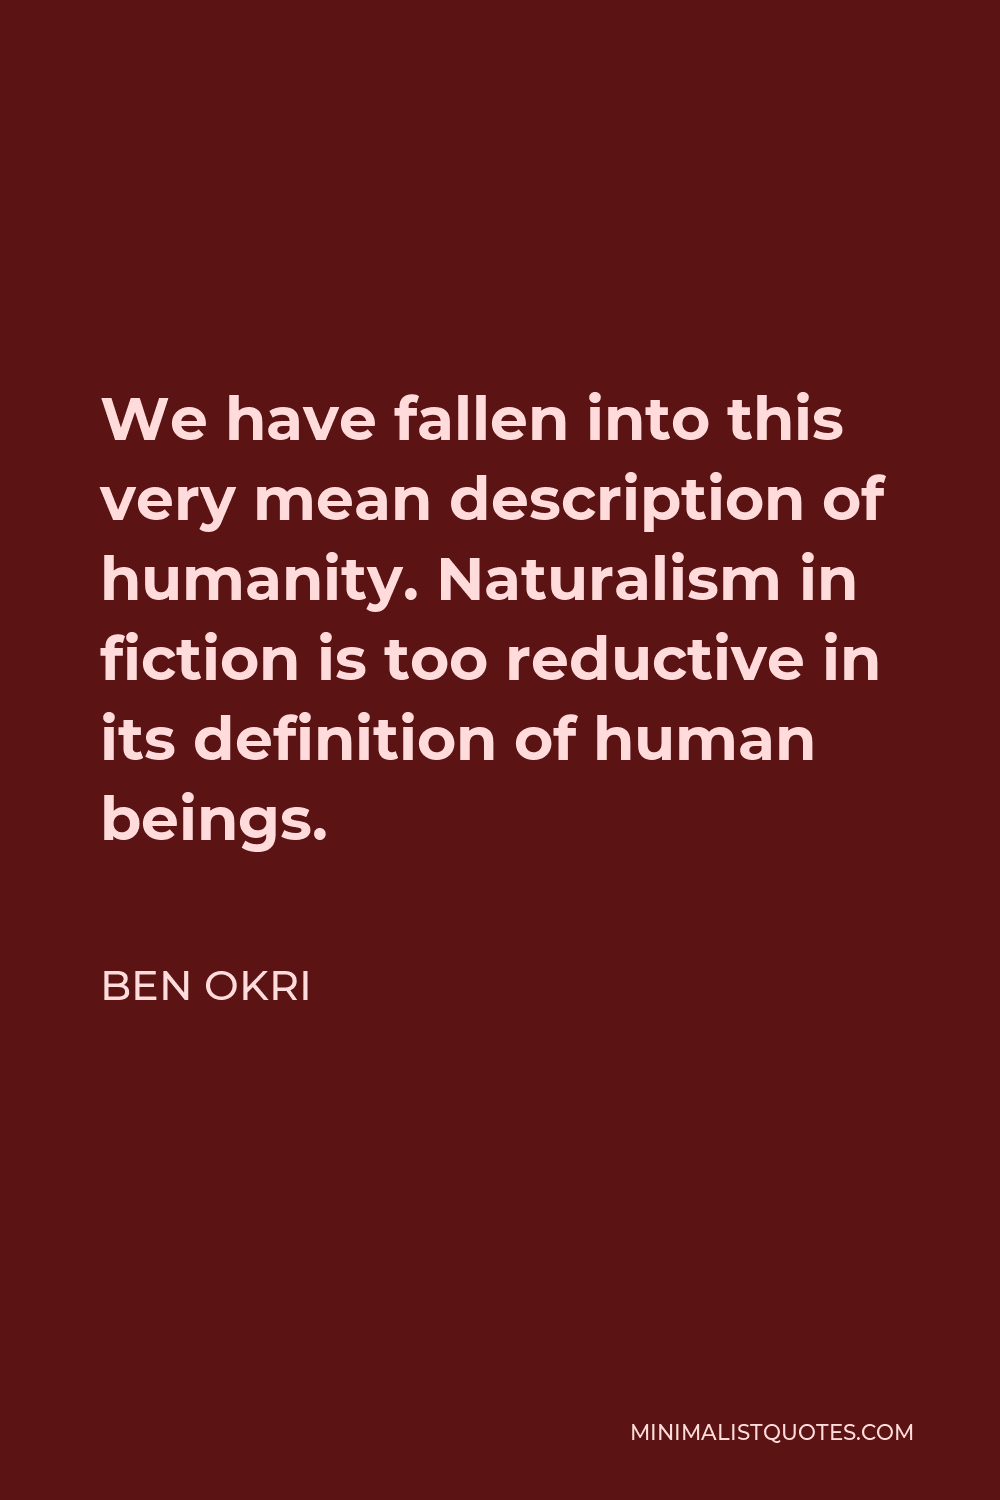 Ben Okri Quote - We have fallen into this very mean description of humanity. Naturalism in fiction is too reductive in its definition of human beings.